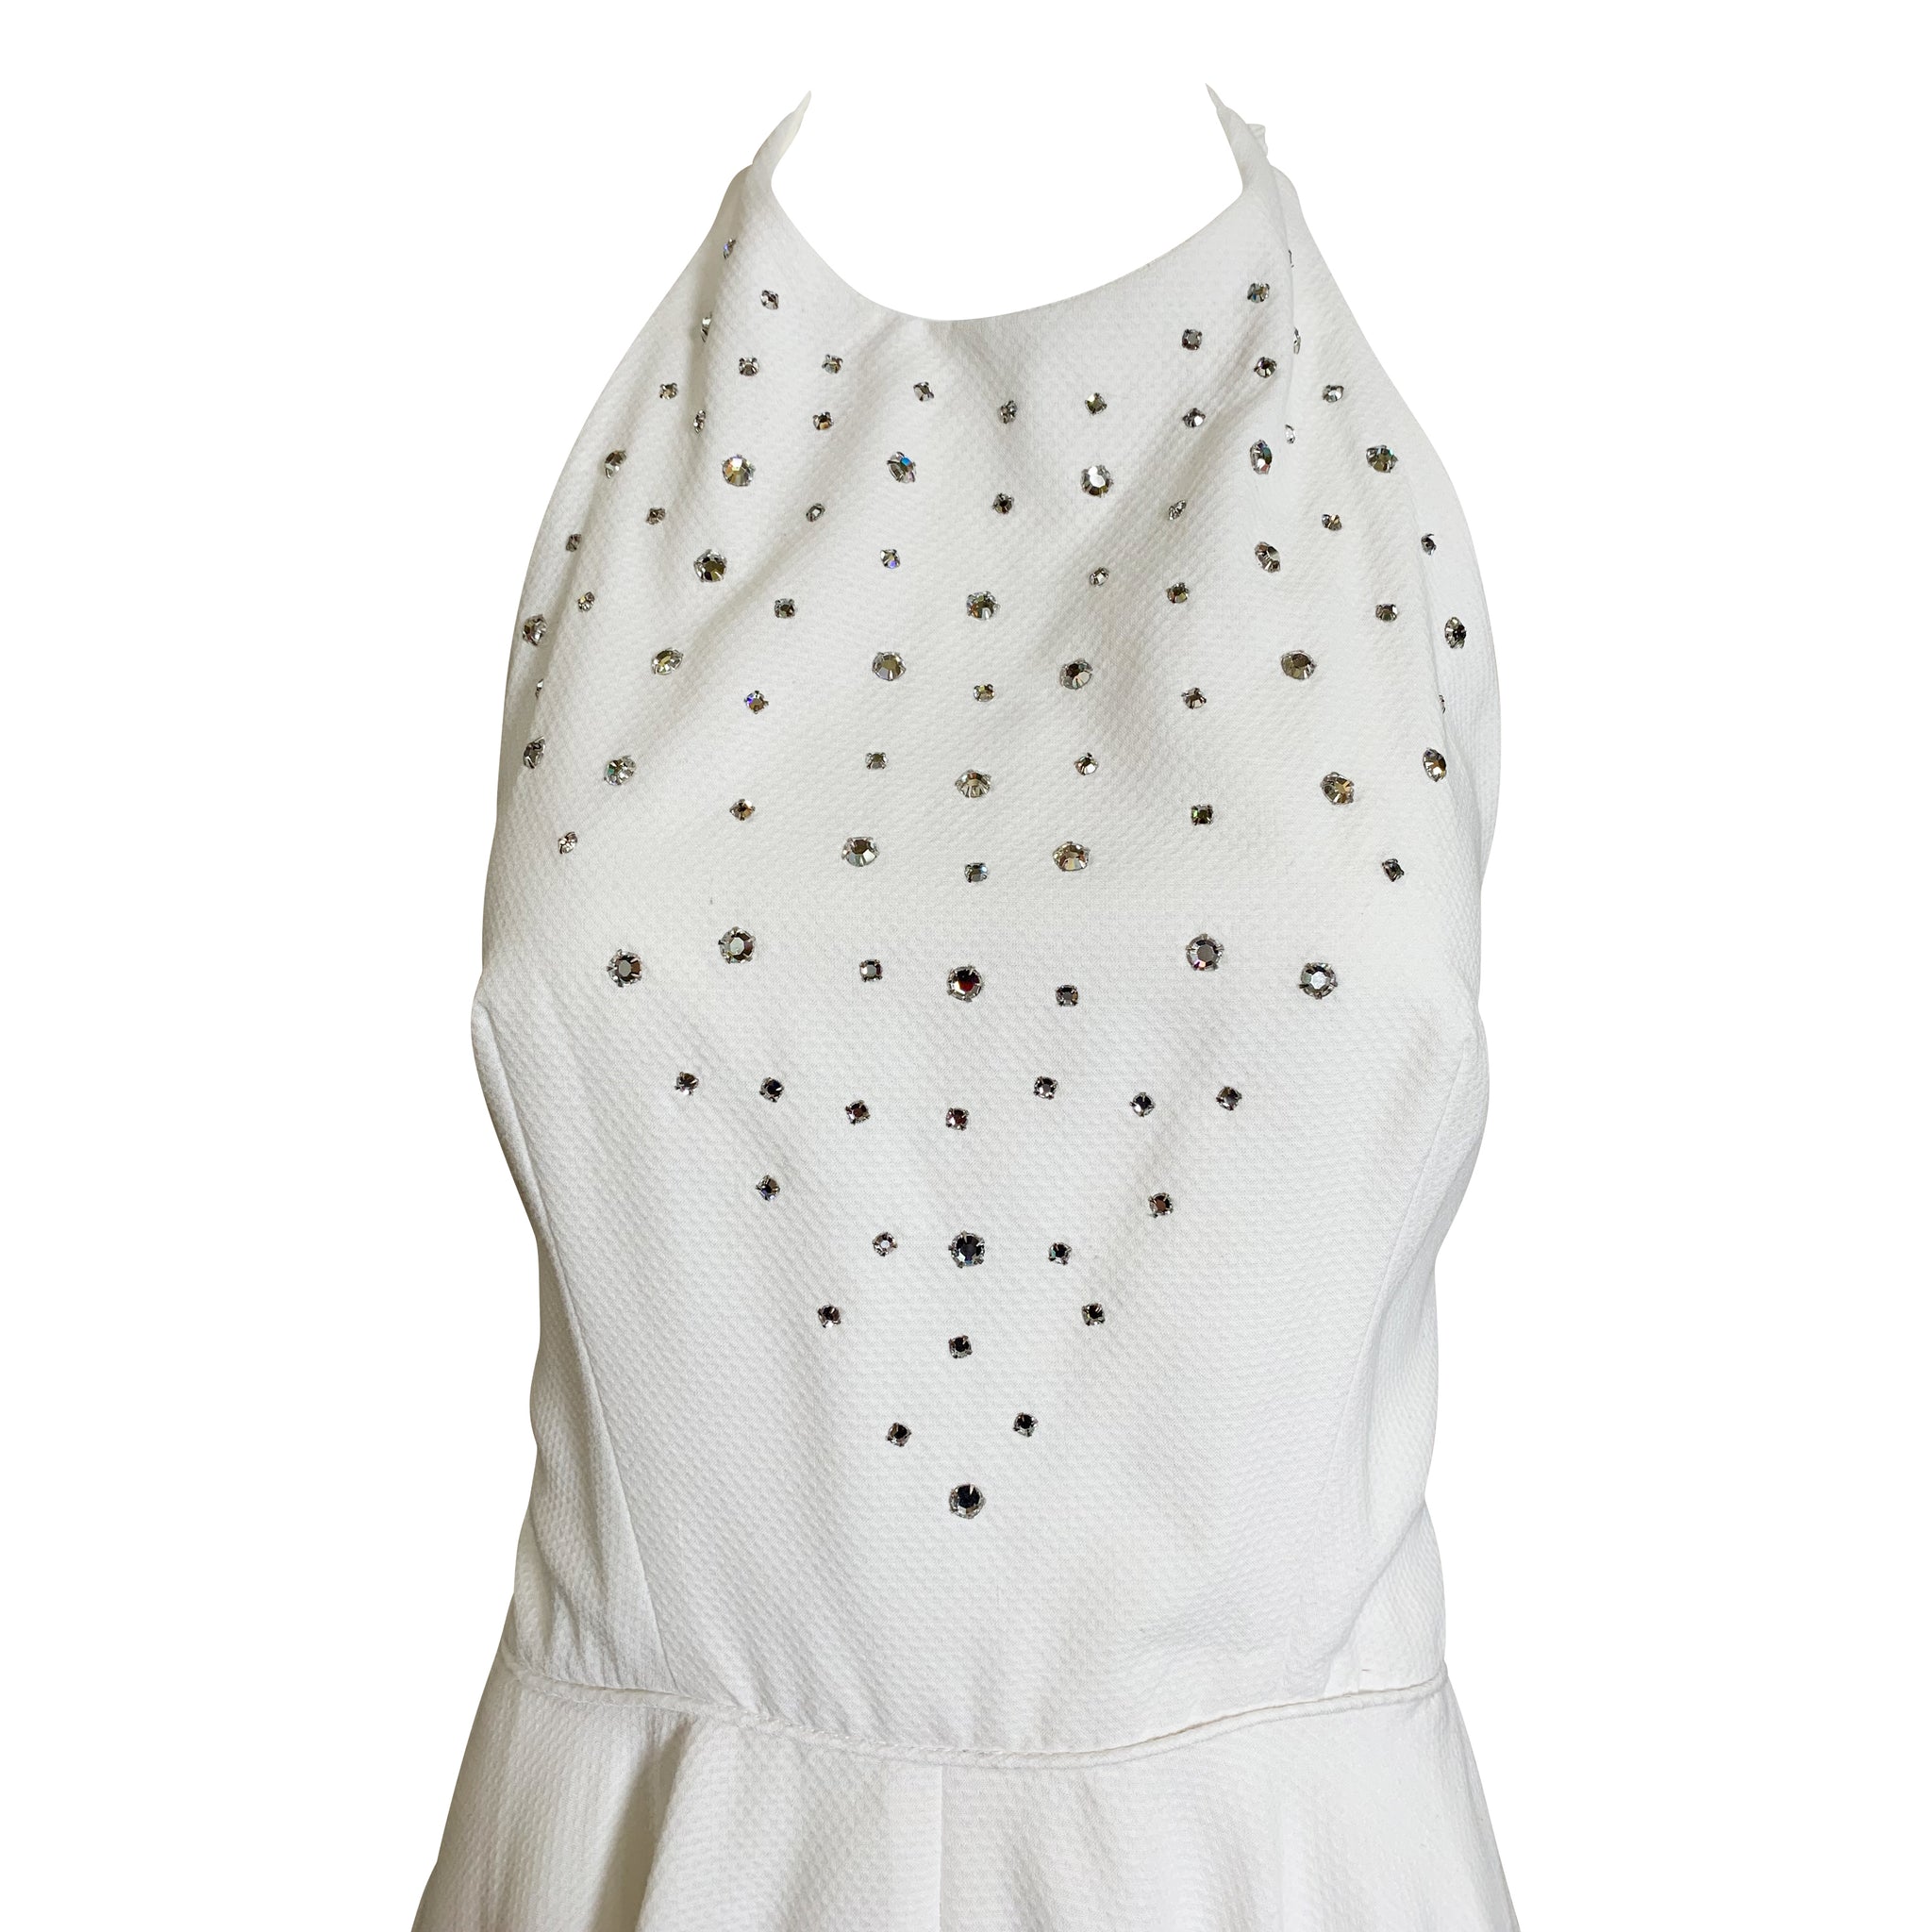 1980s Does 1950s White Pique Halter Dress DETAIL 4 of 5